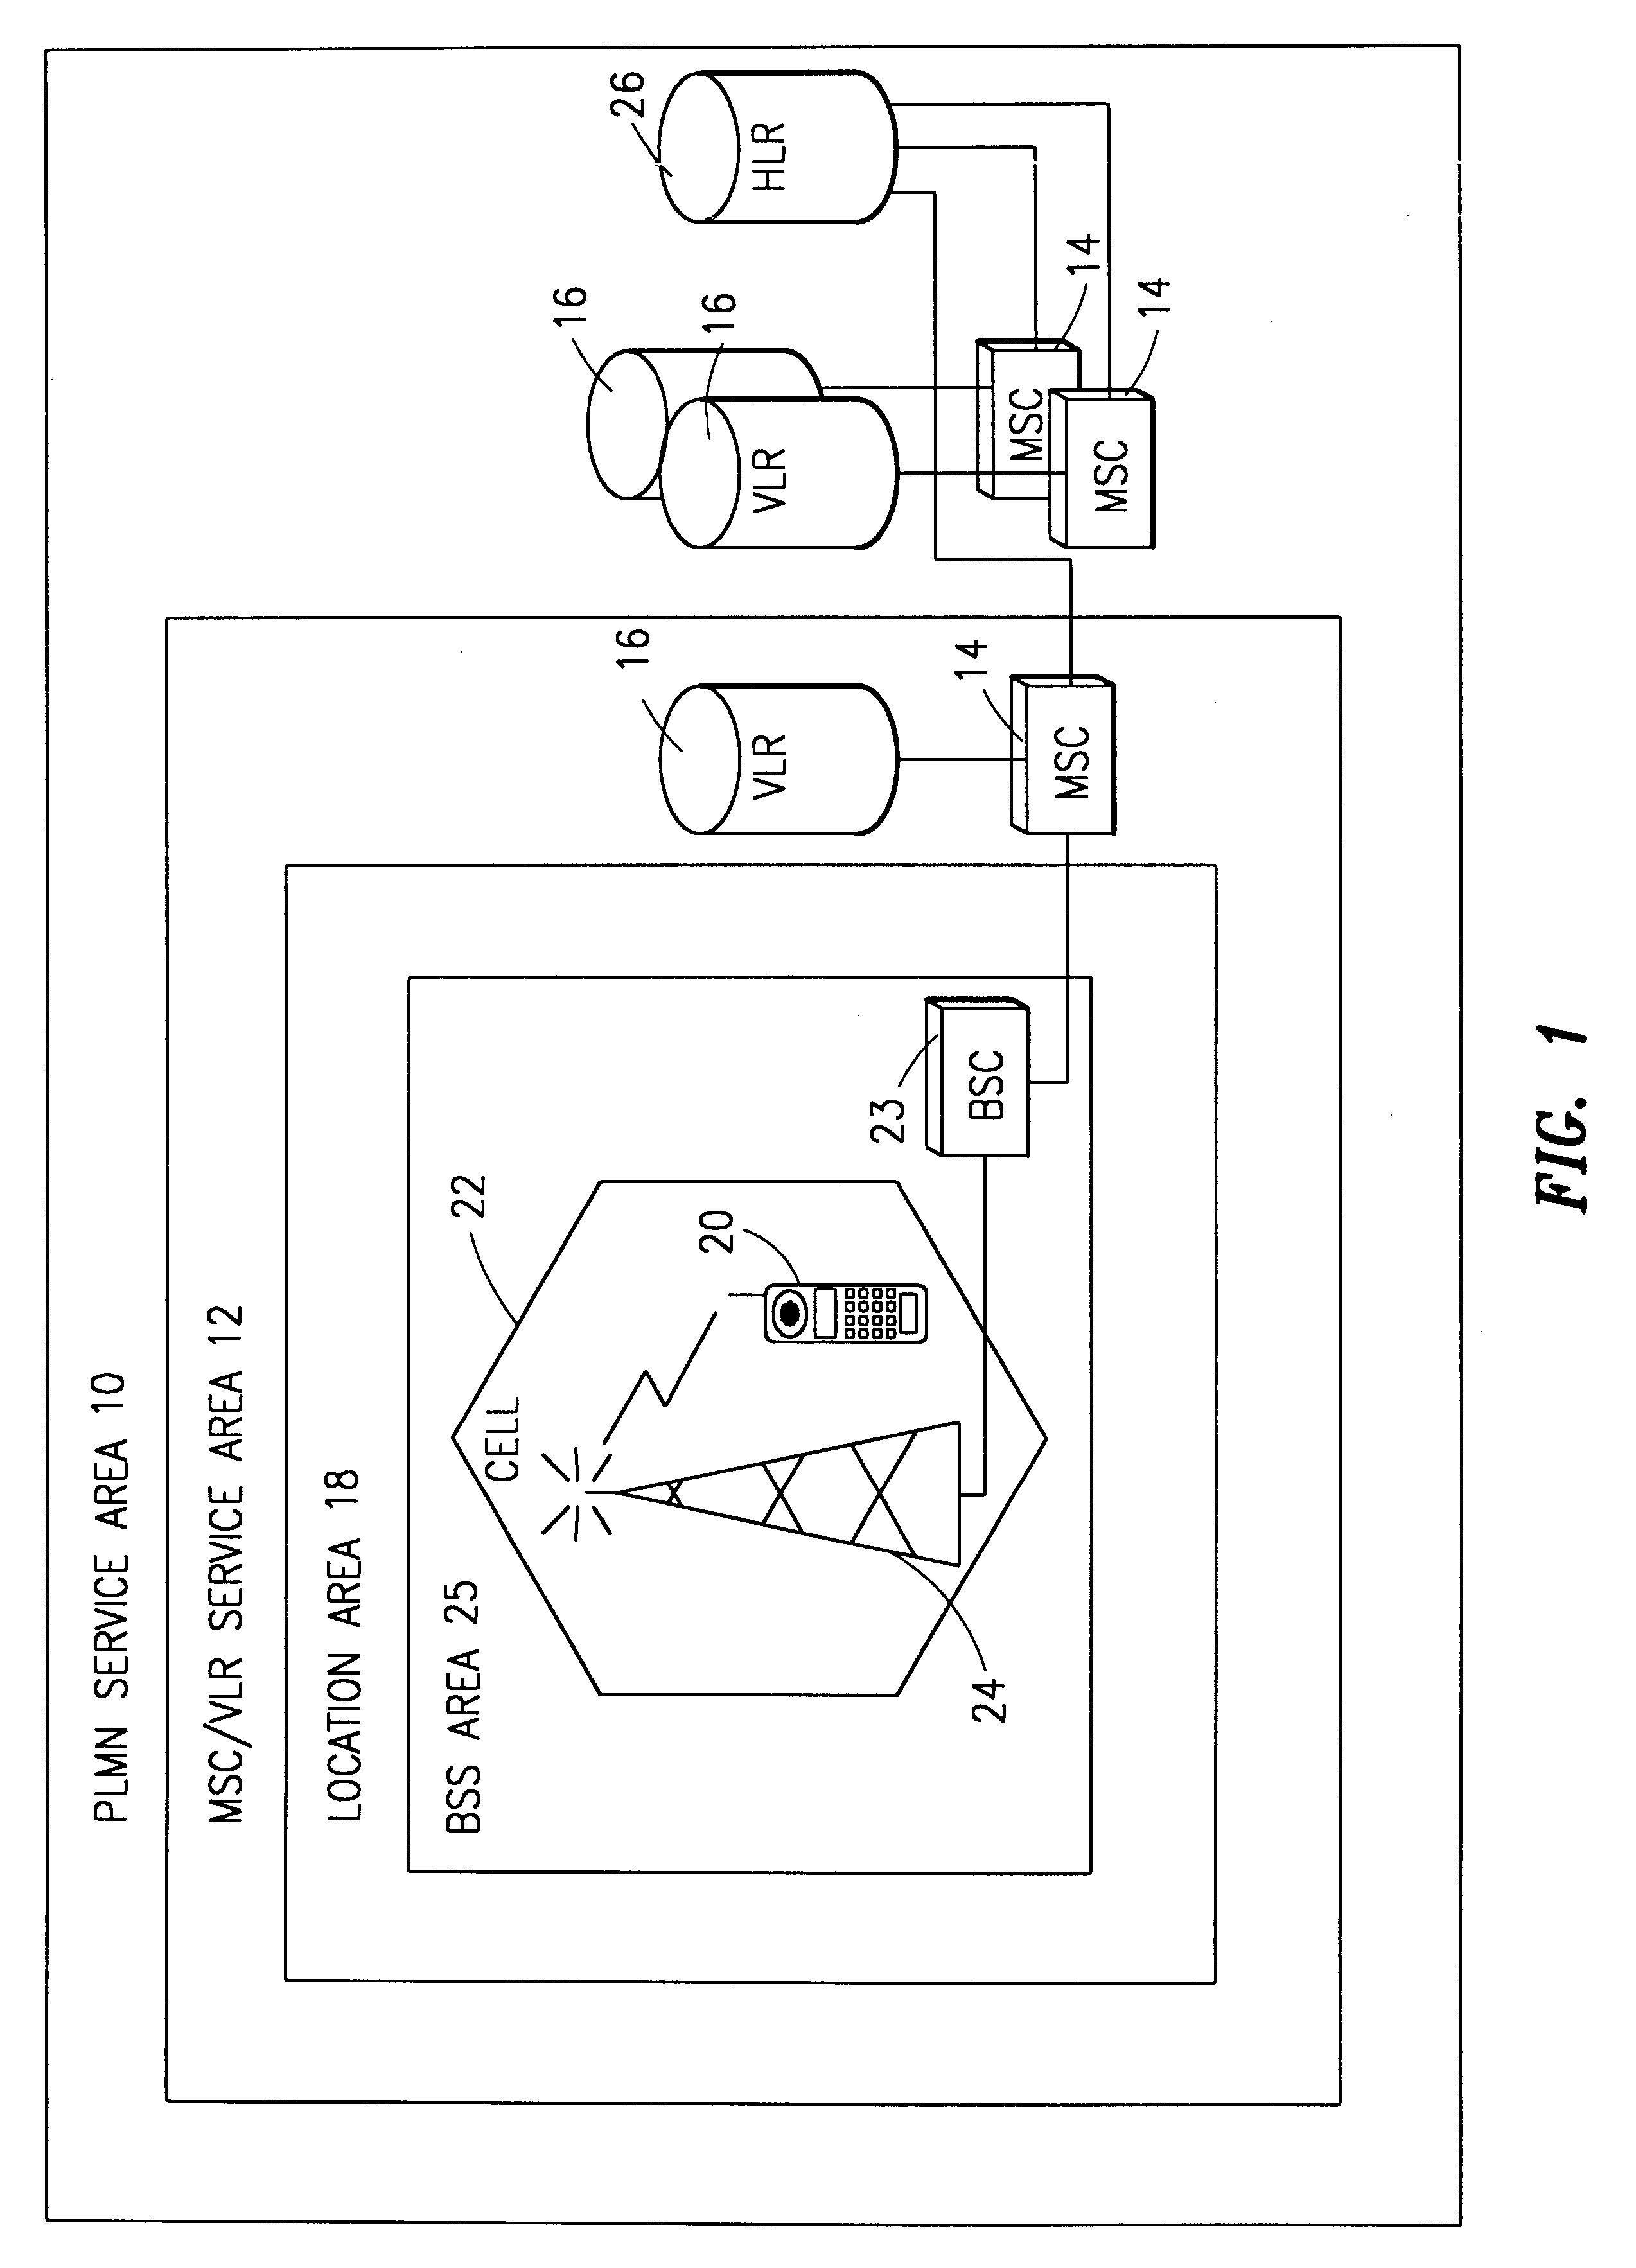 System and method for performing an inter mobile system handover using the internet telephony system